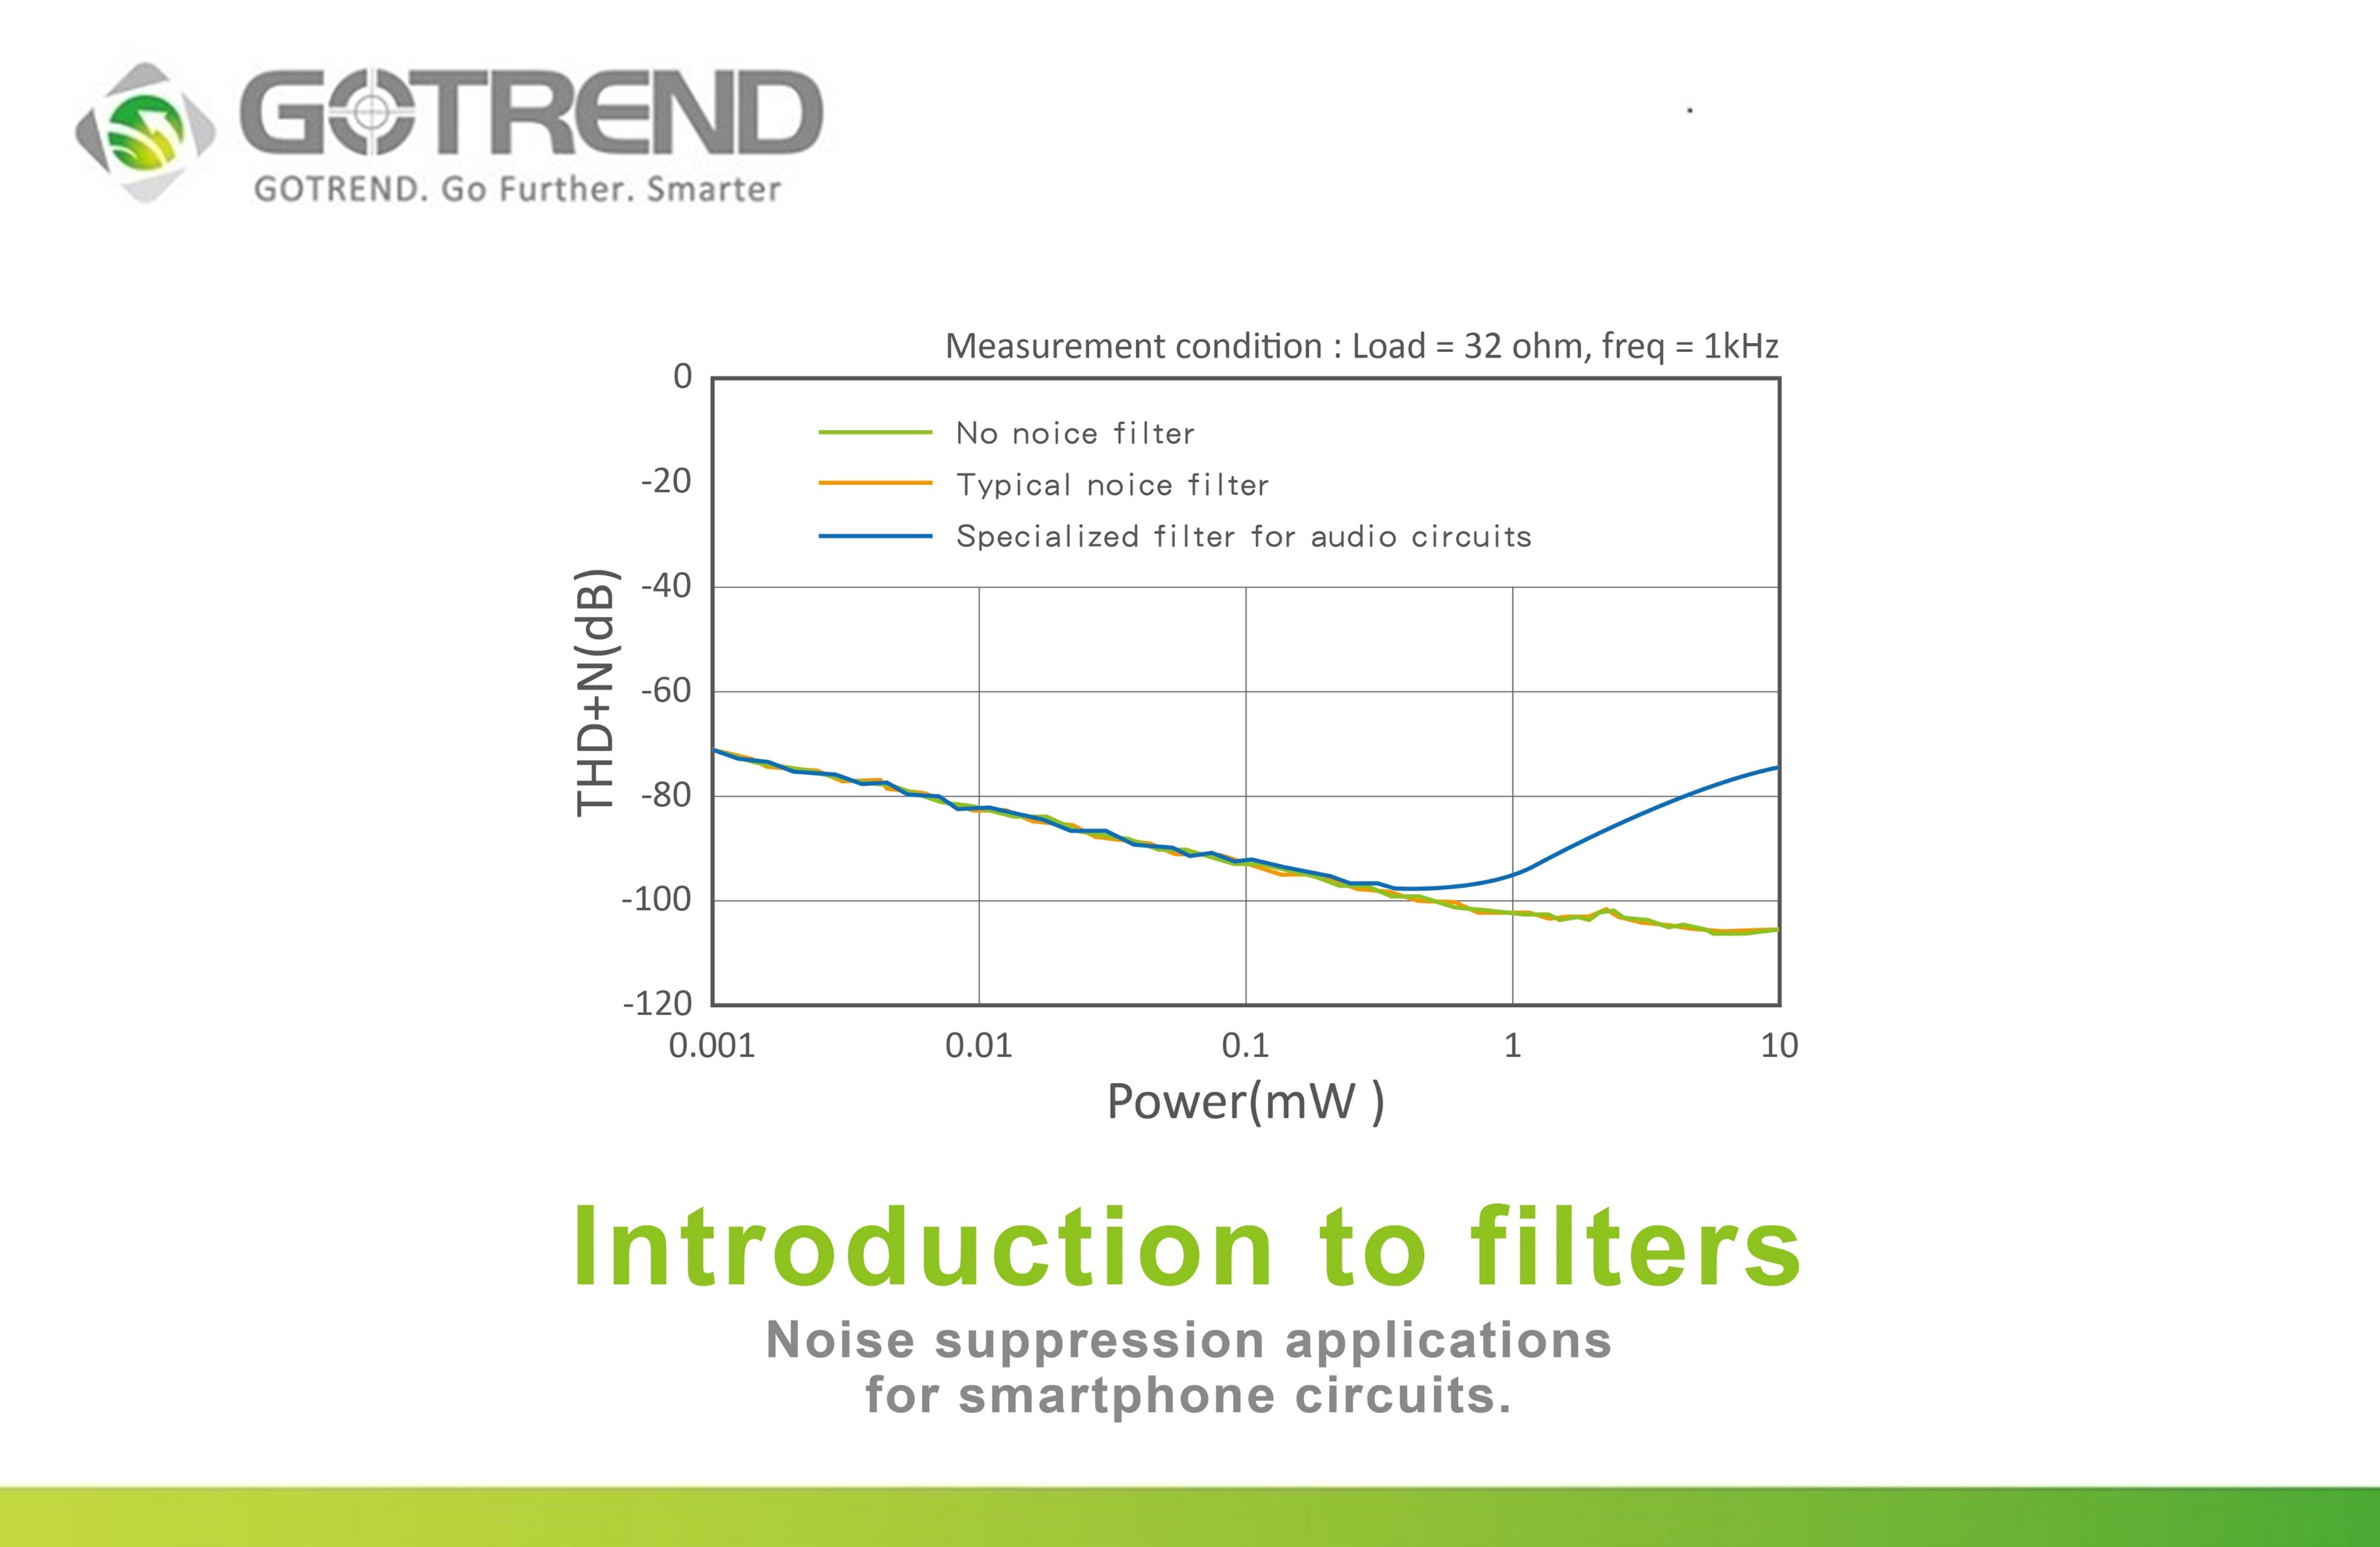 Introduction to filters & noise suppression applications for smartphone circuits-GOTREND-article